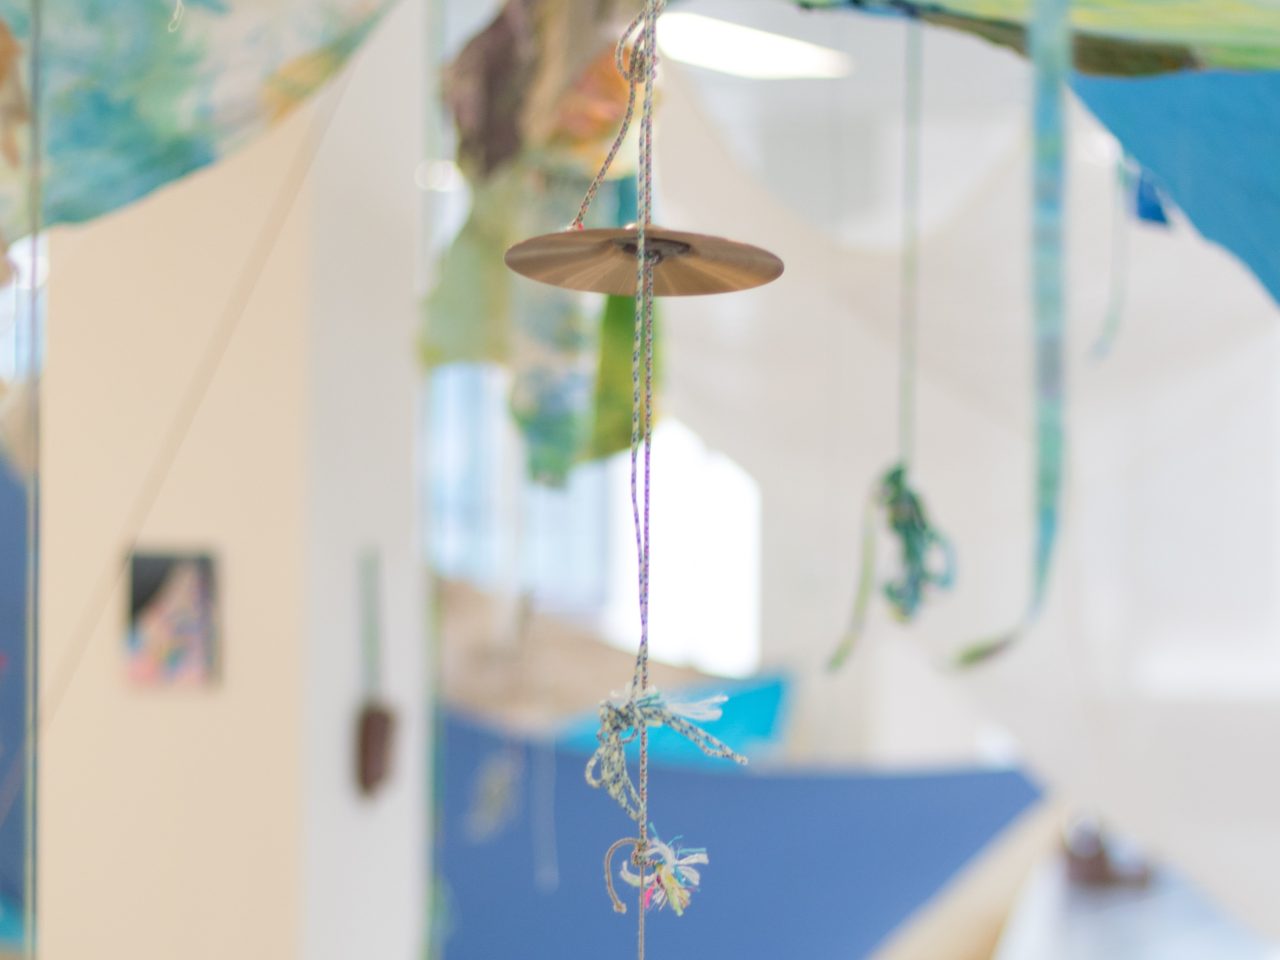 A detail shot of a small percussion cymbal hung on a colourful piece of string.